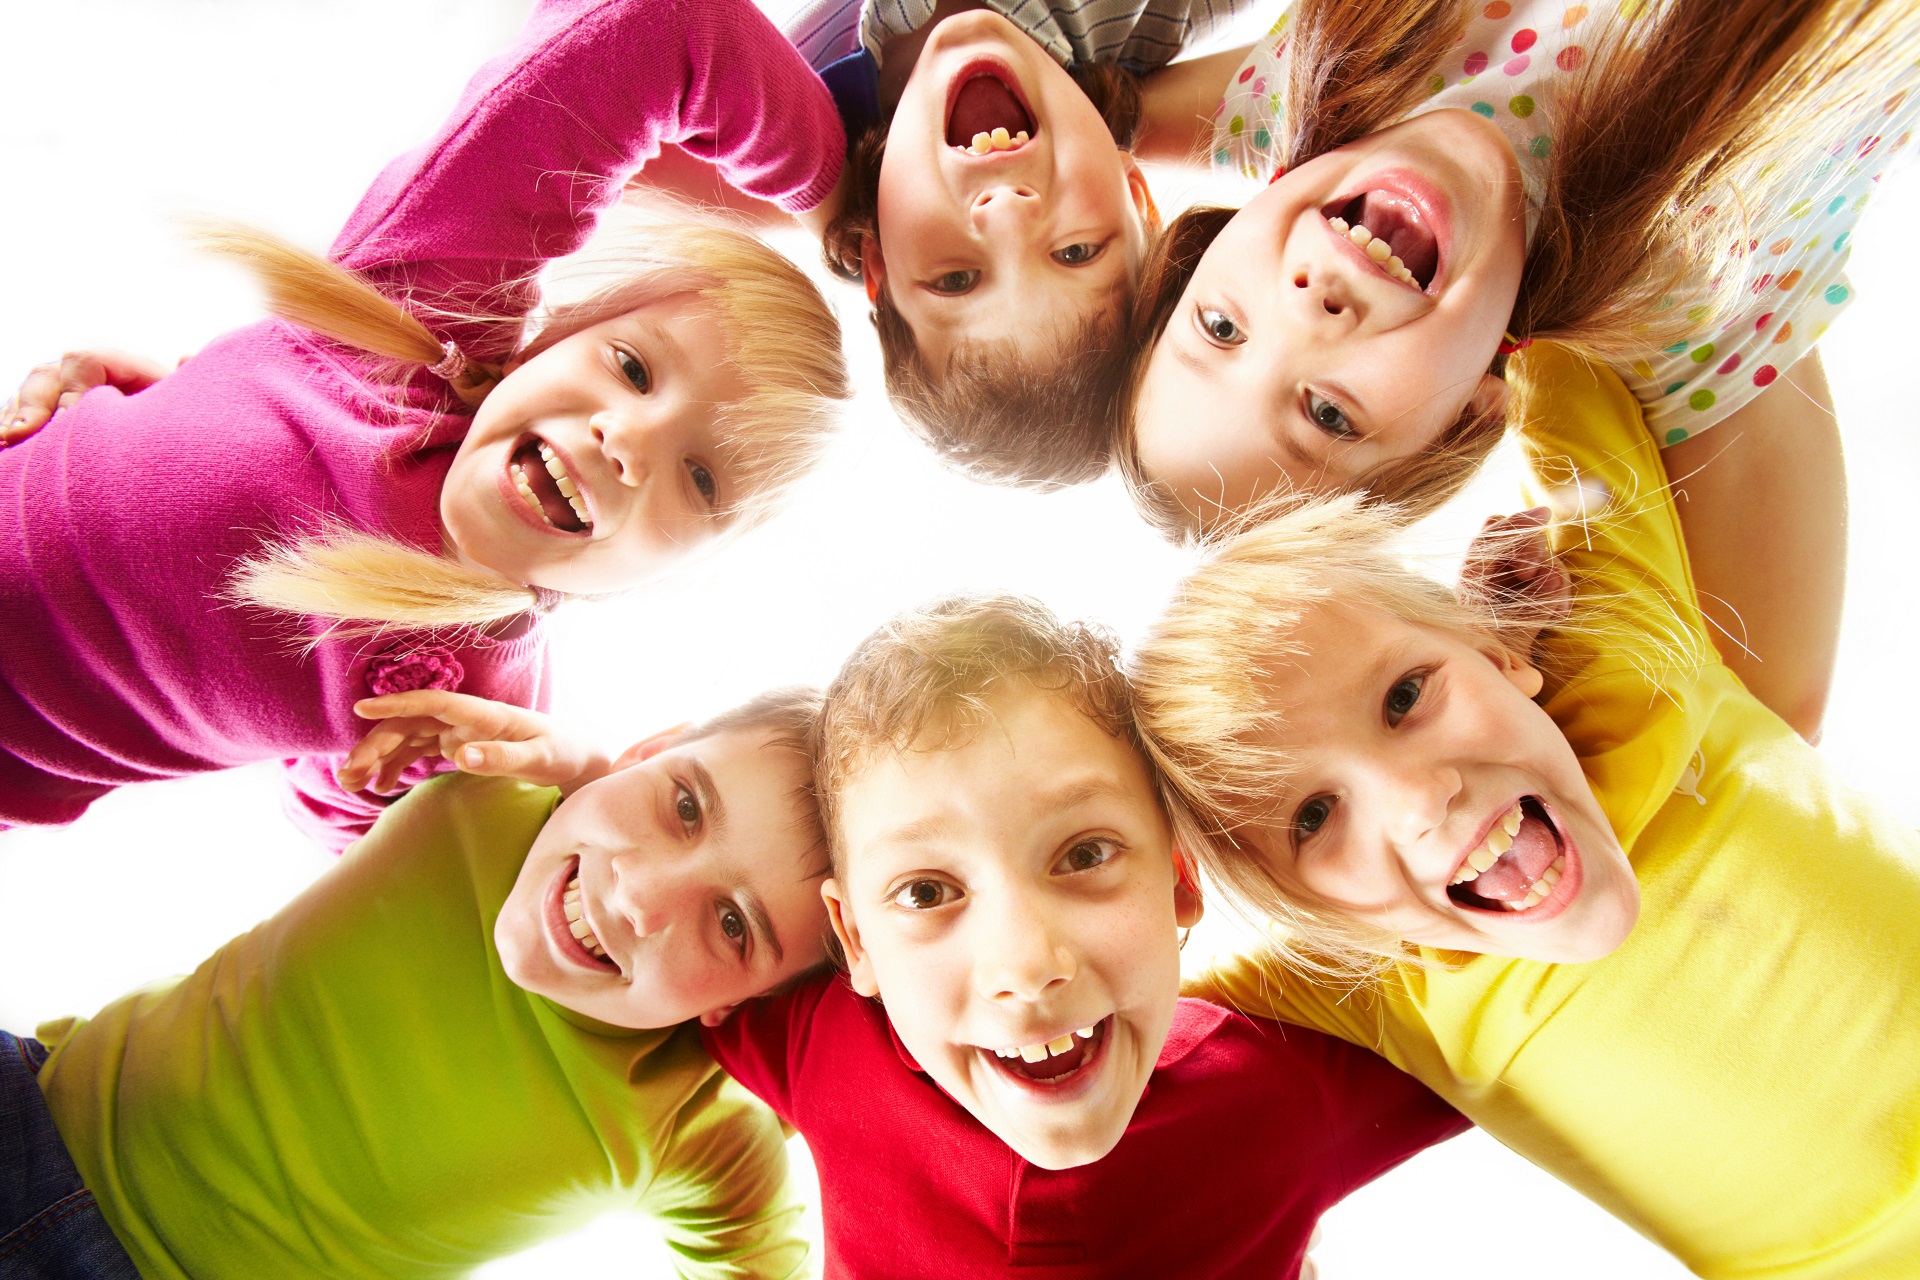 Image of happy kids representing youth and fun